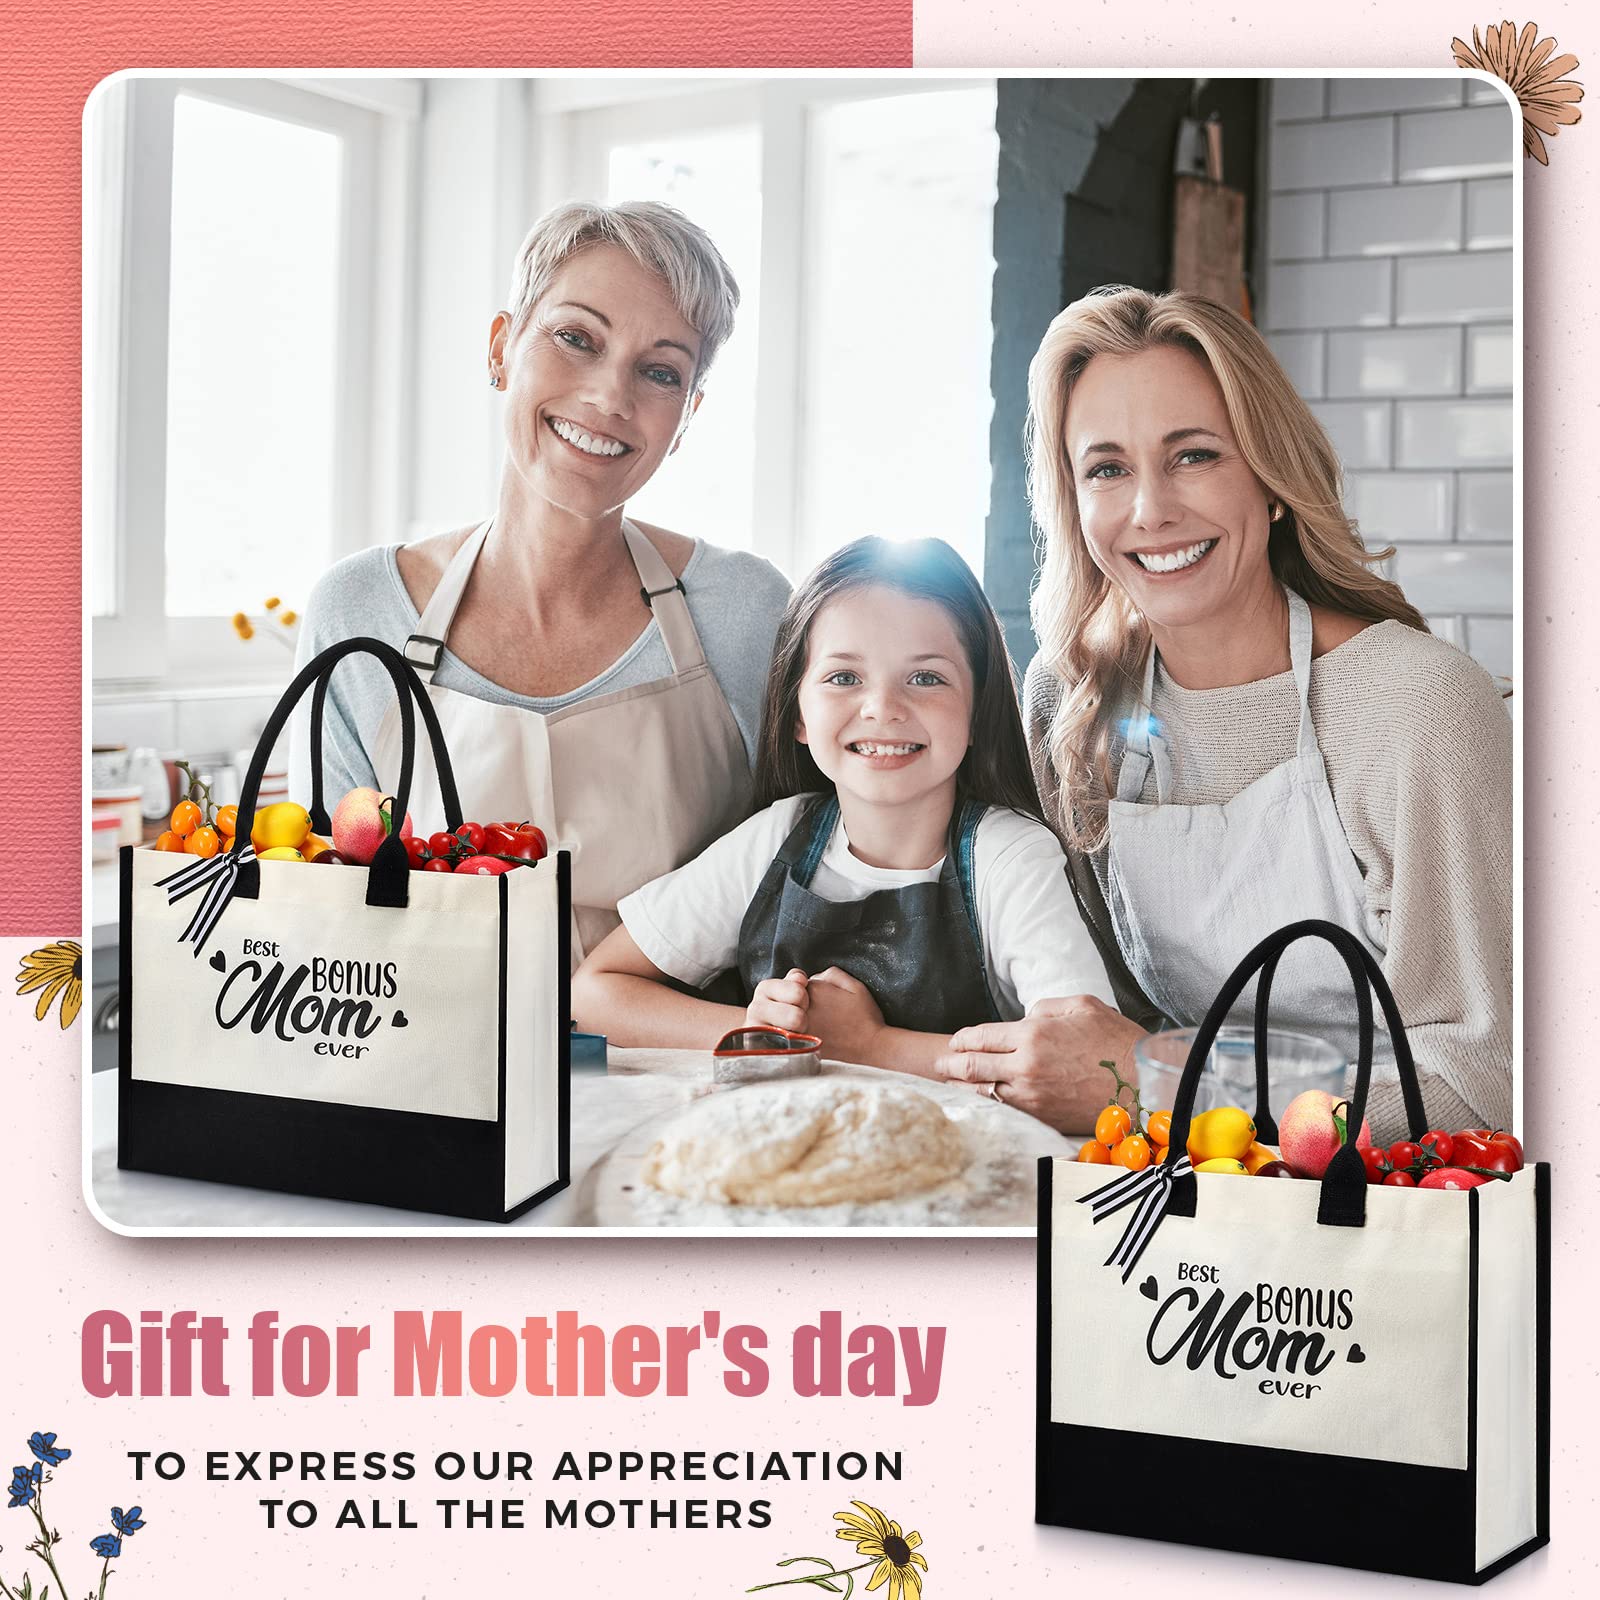 Best Bonus Mom Ever Appreciation Gifts Canvas Tote Bag Women Mother's Day Gift for Stepmom with Zipper Kitchen Reusable Grocery Bags Birthday Thank You Gift from Daughter Son Black and White